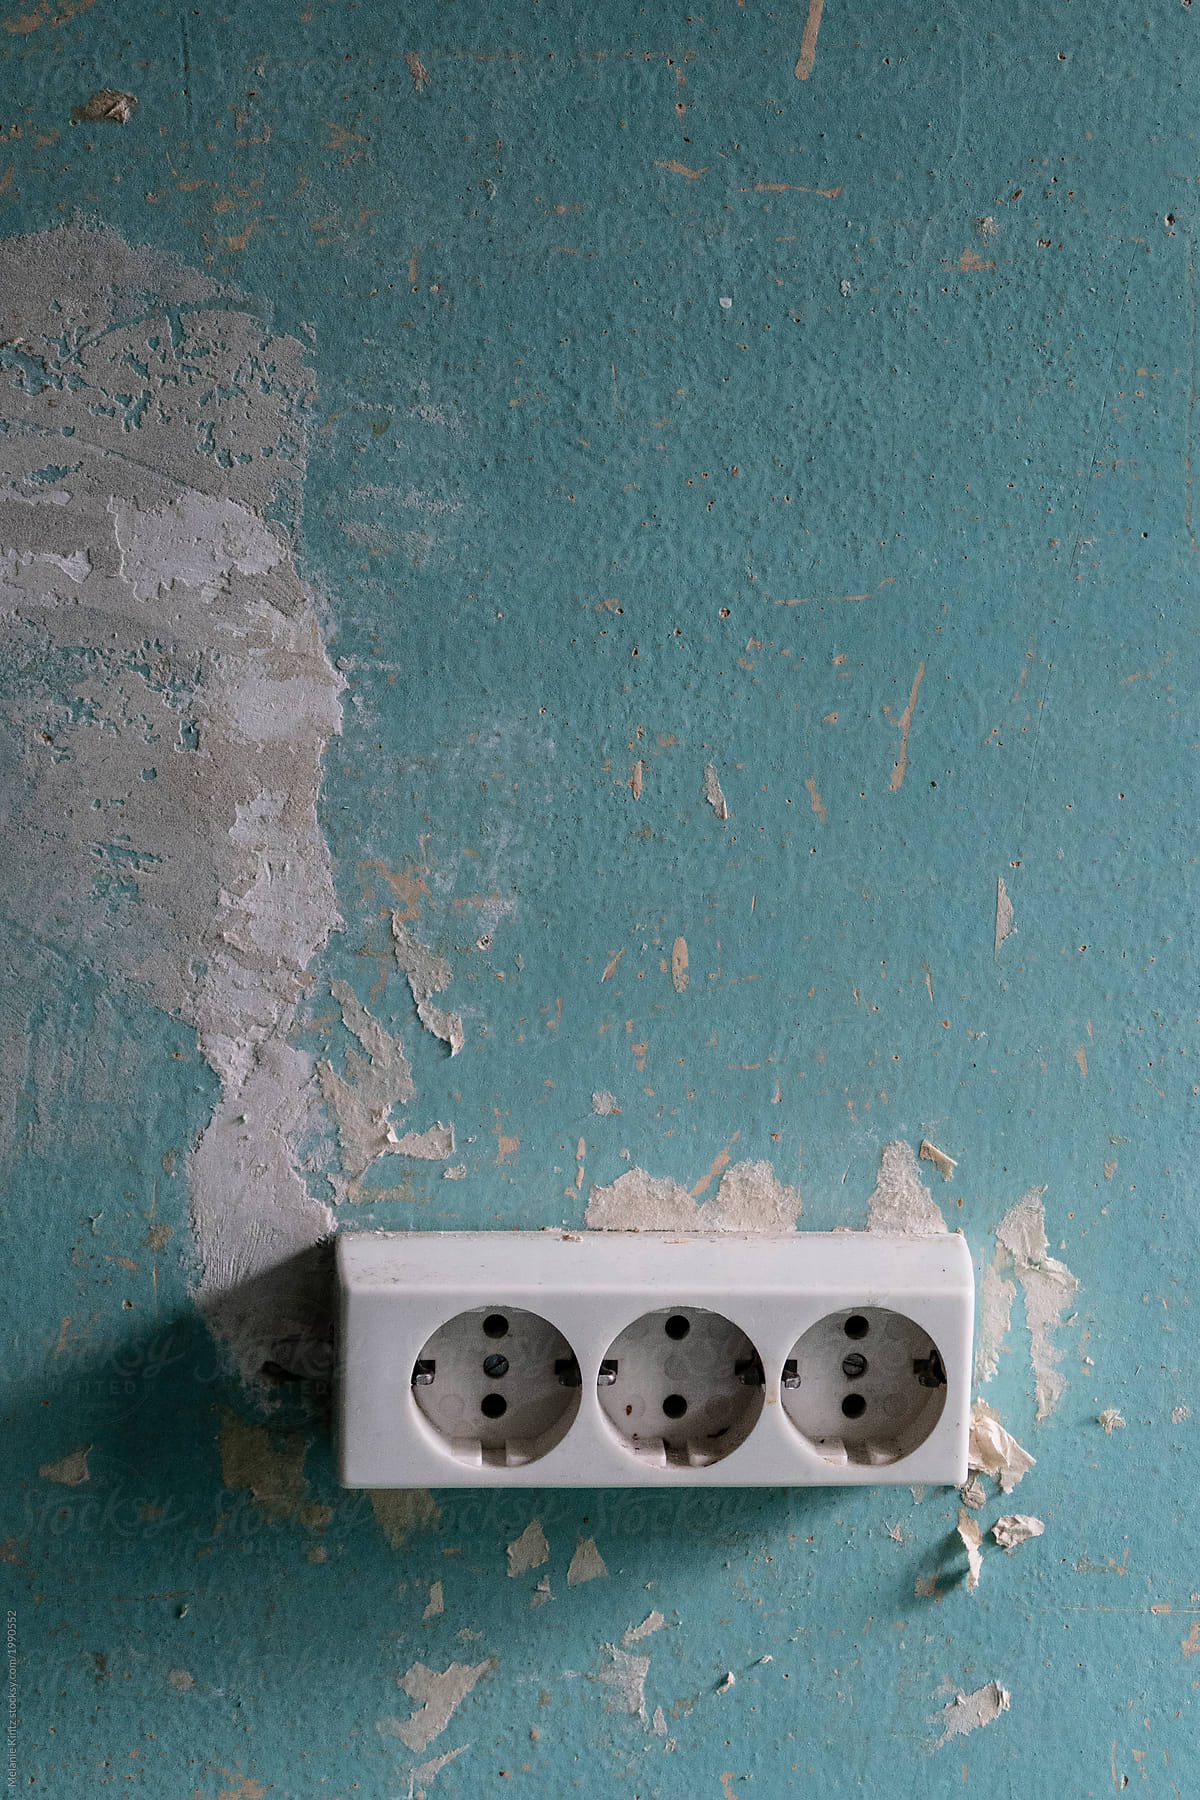 Electrical Distribution box plastered in a wall